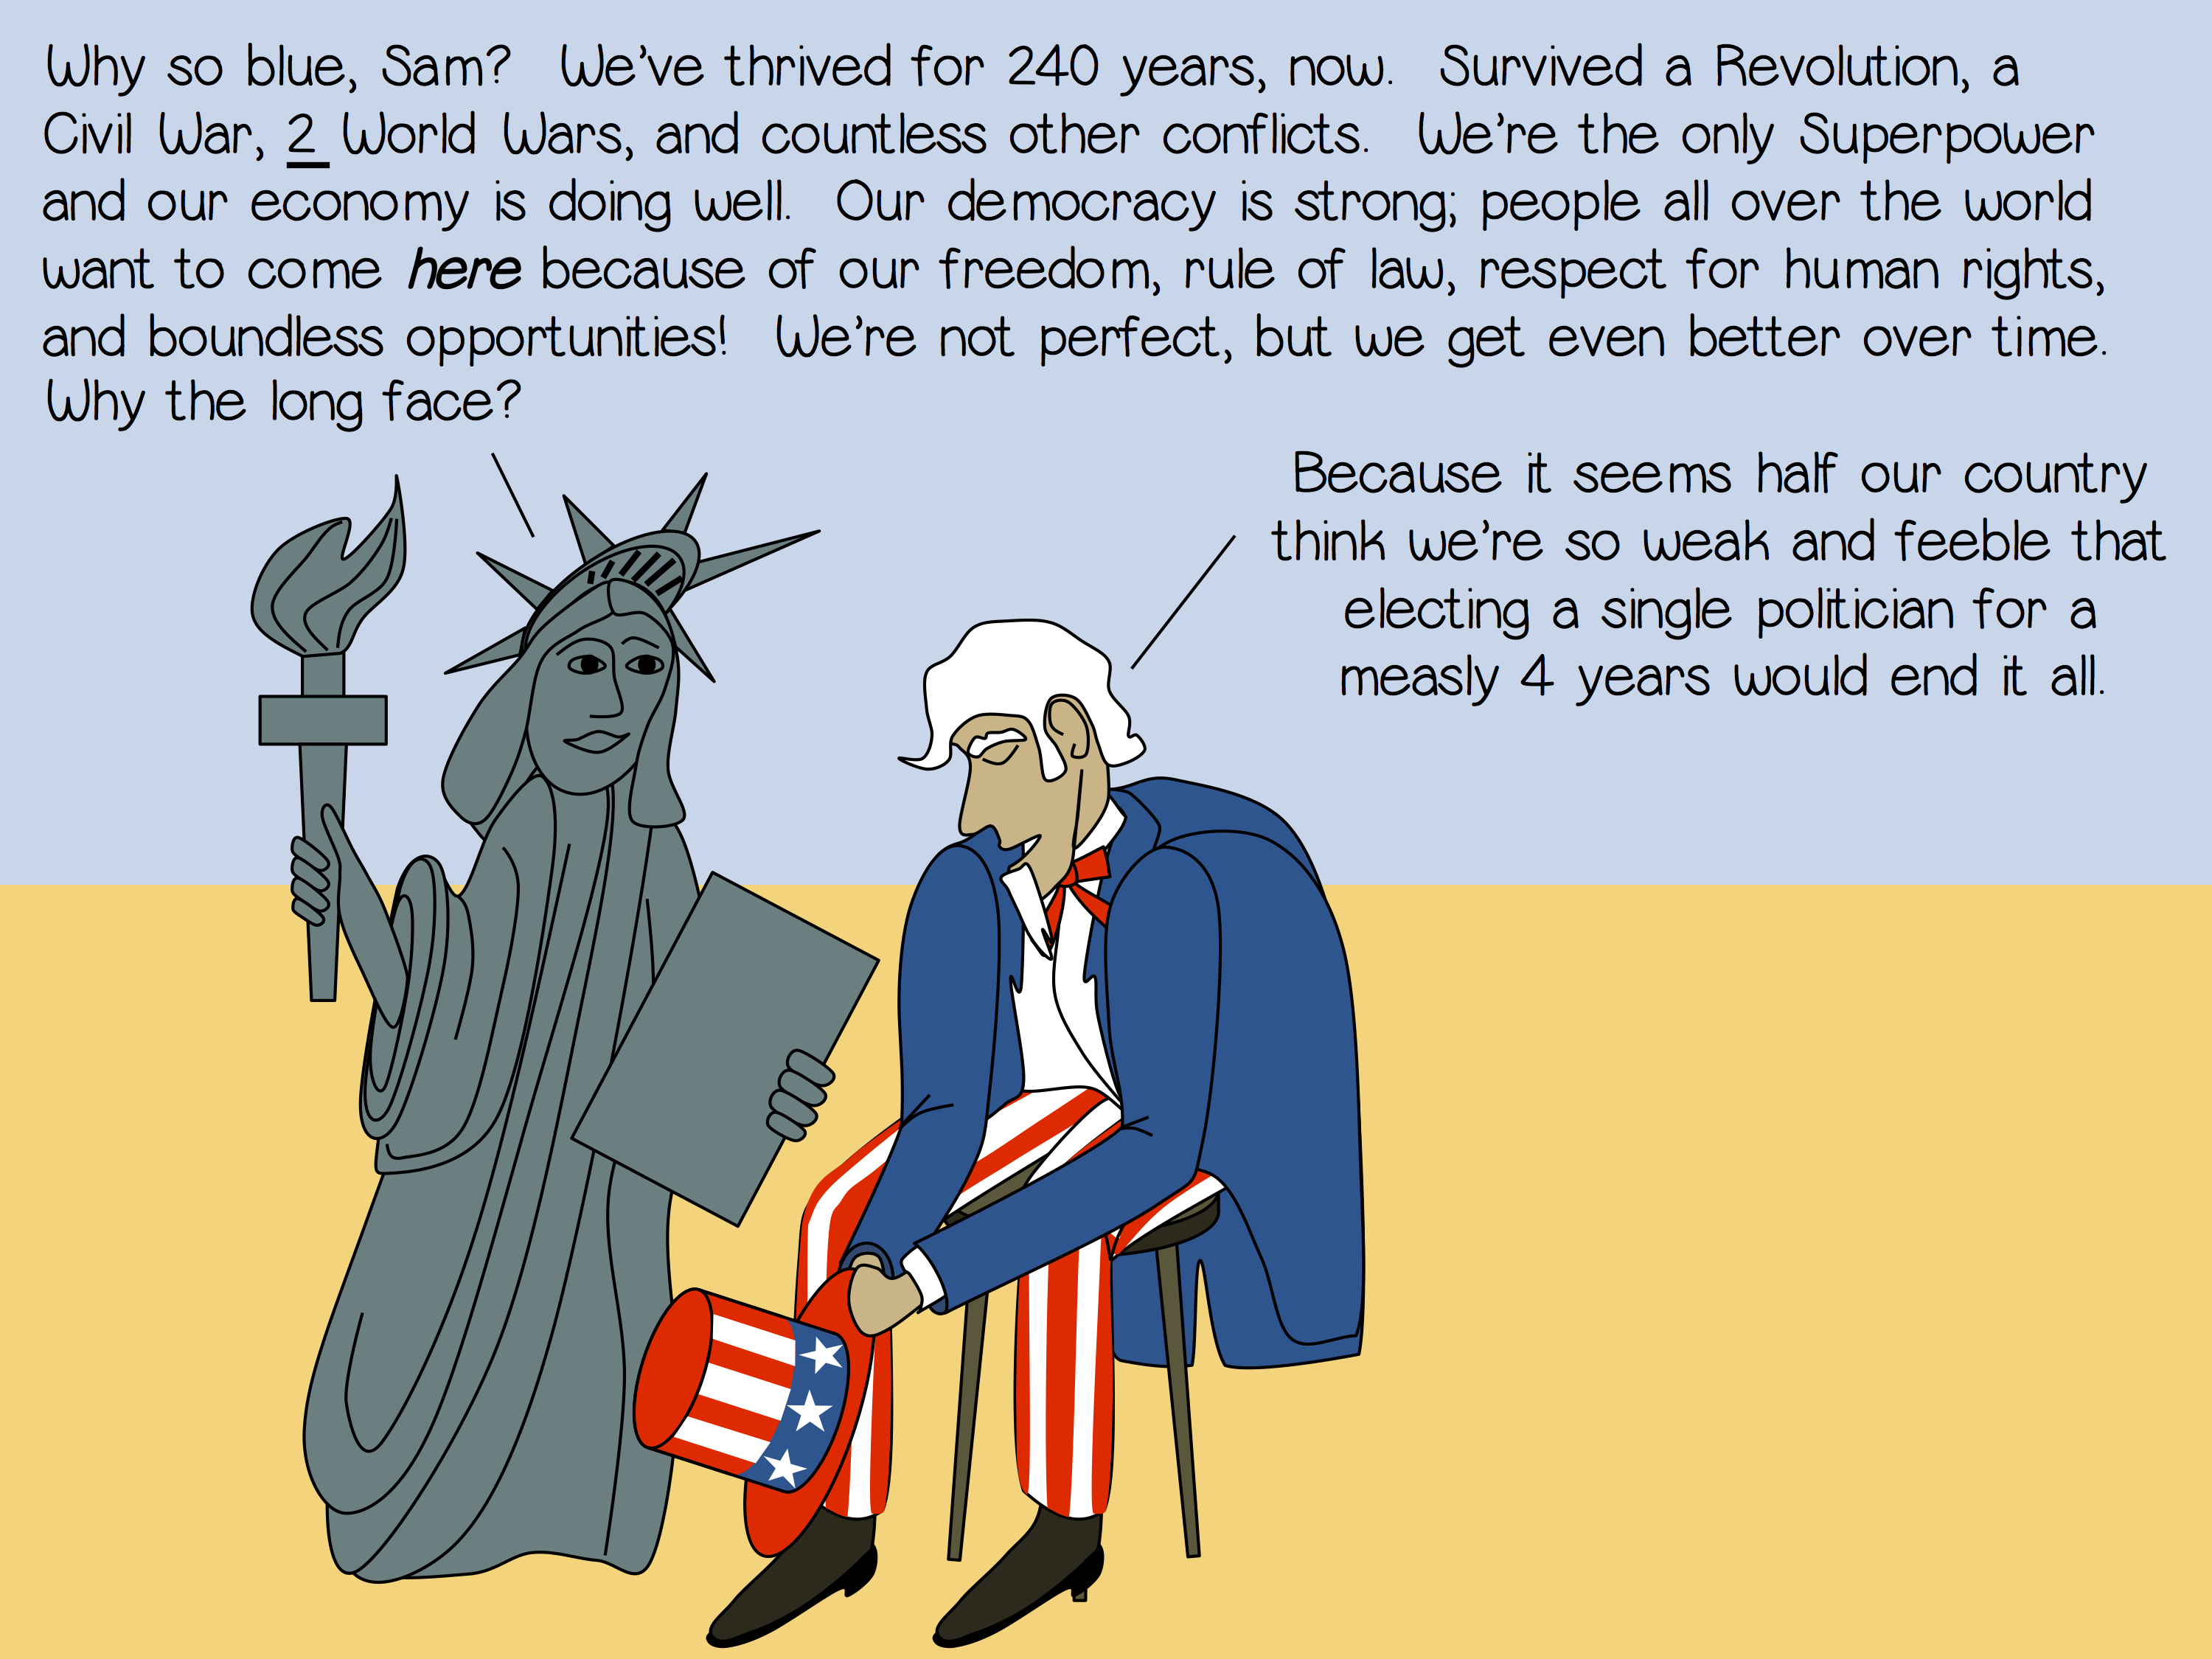 Uncle Sam is sad because people think the U.S. is so weak & feeble a politician could destroy us